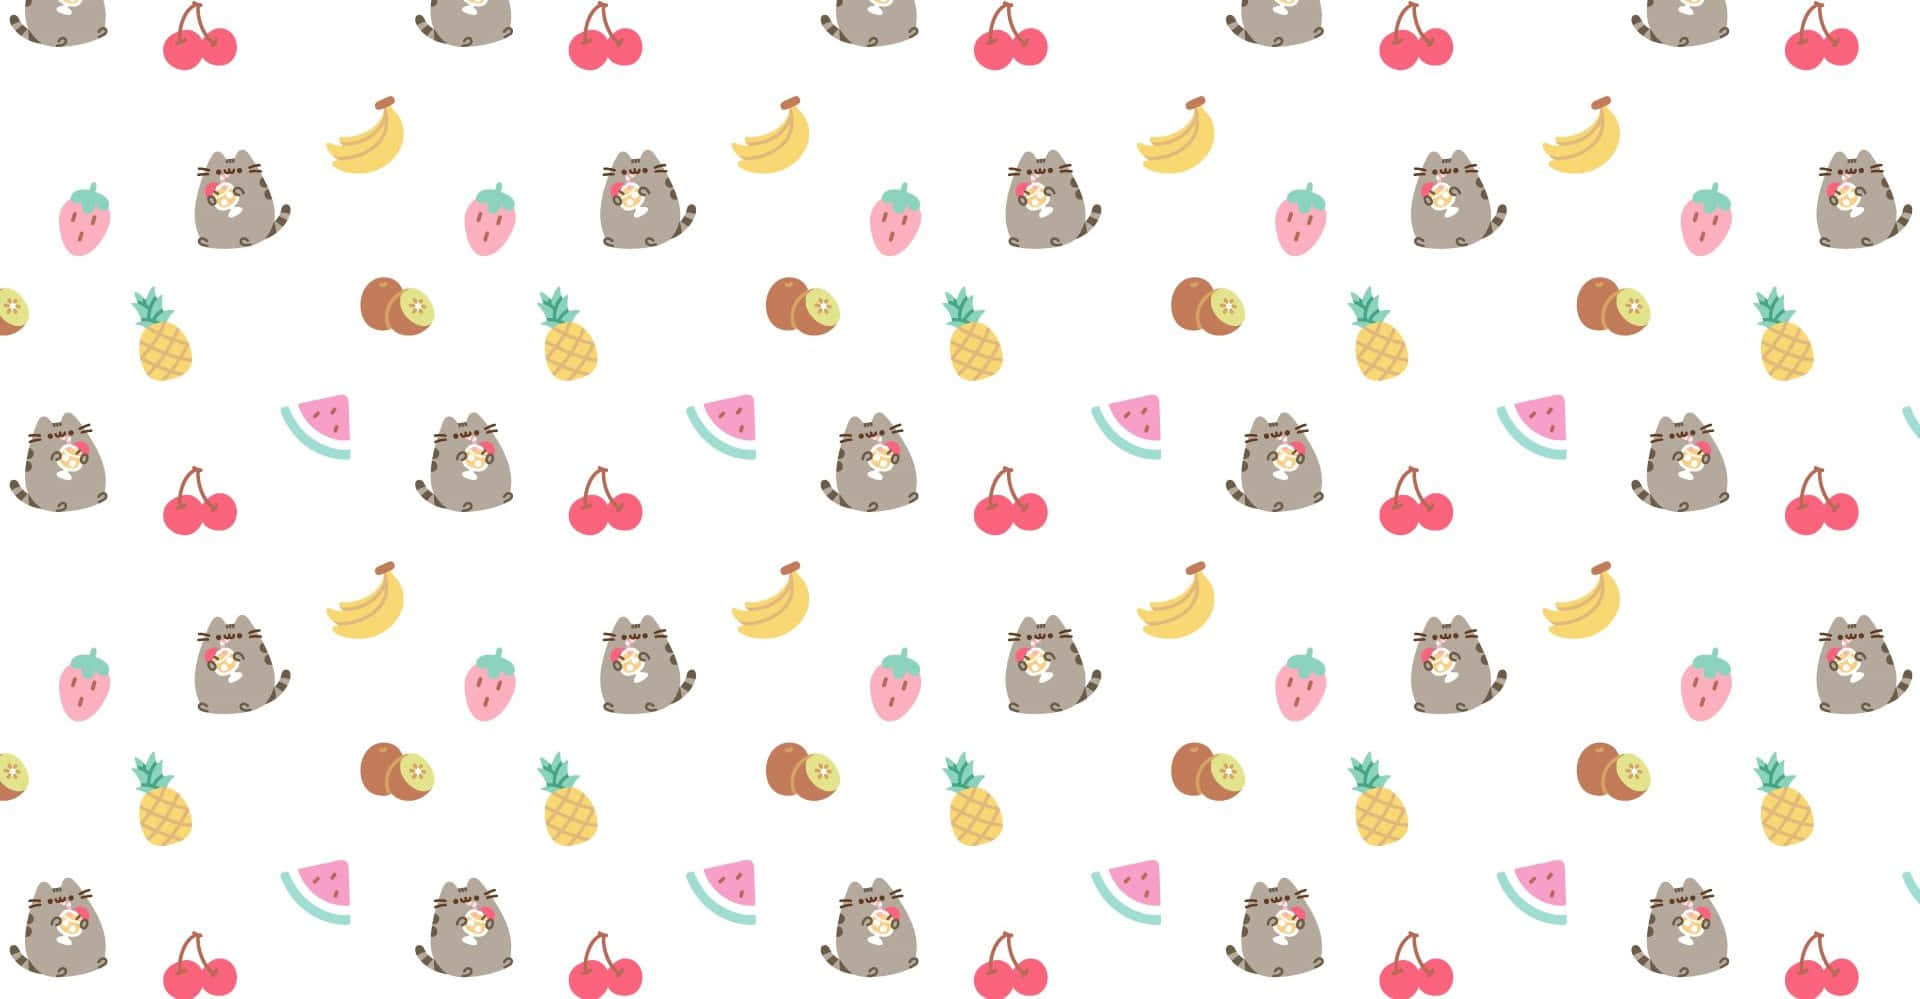 Get your paws on cute kitty fun with Pusheen!